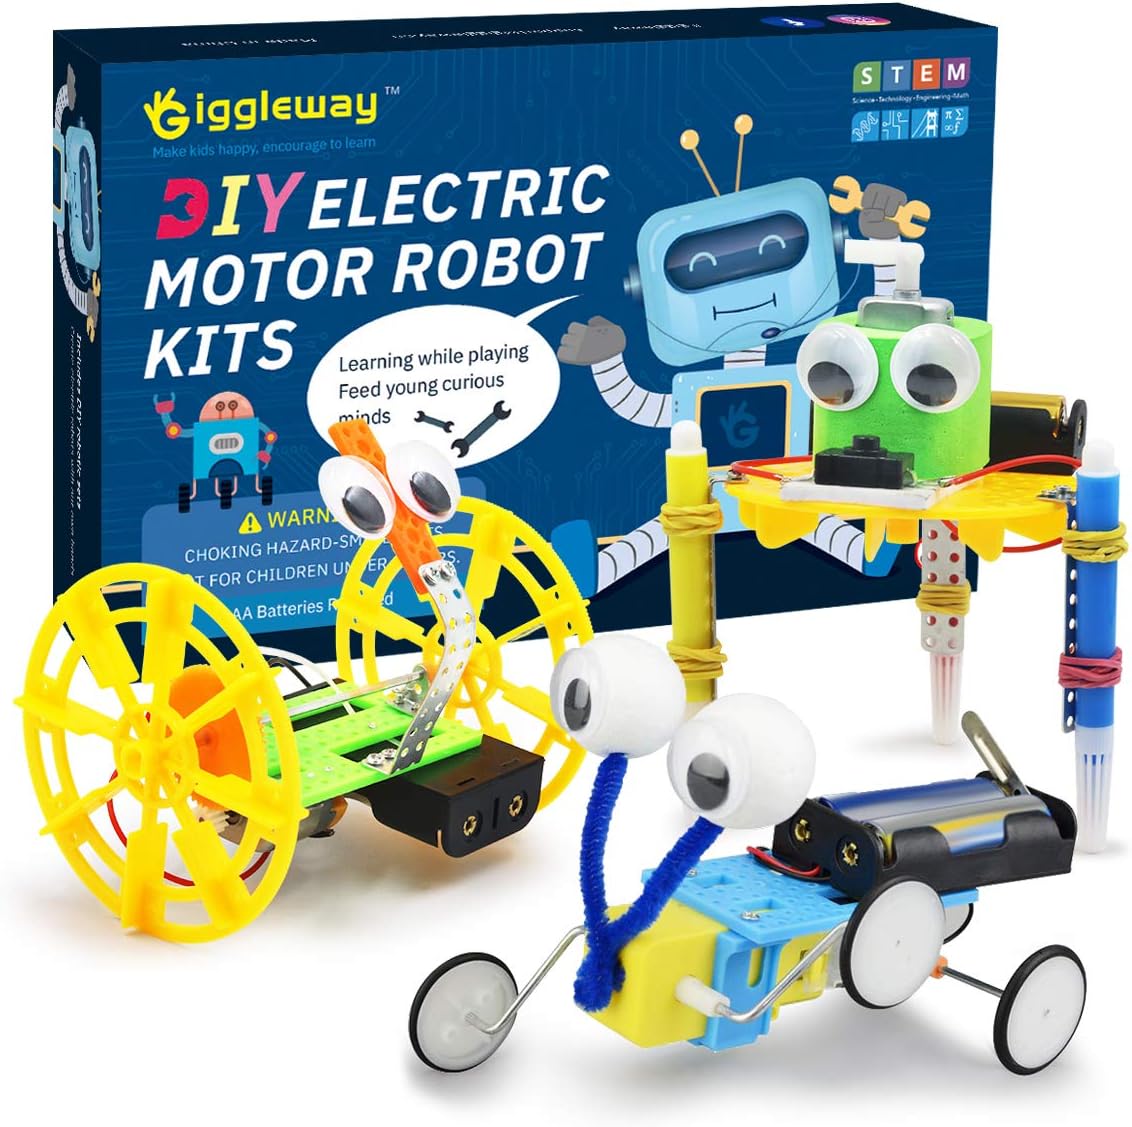 Giggleway Electric Motor Robotic Science Kits, DIY STEM Toys for Kids, Building Science Experiment Kits for Boys and Girls-Doodling, Balance Car, Reptile Robot (3 Kits) : Toys Games